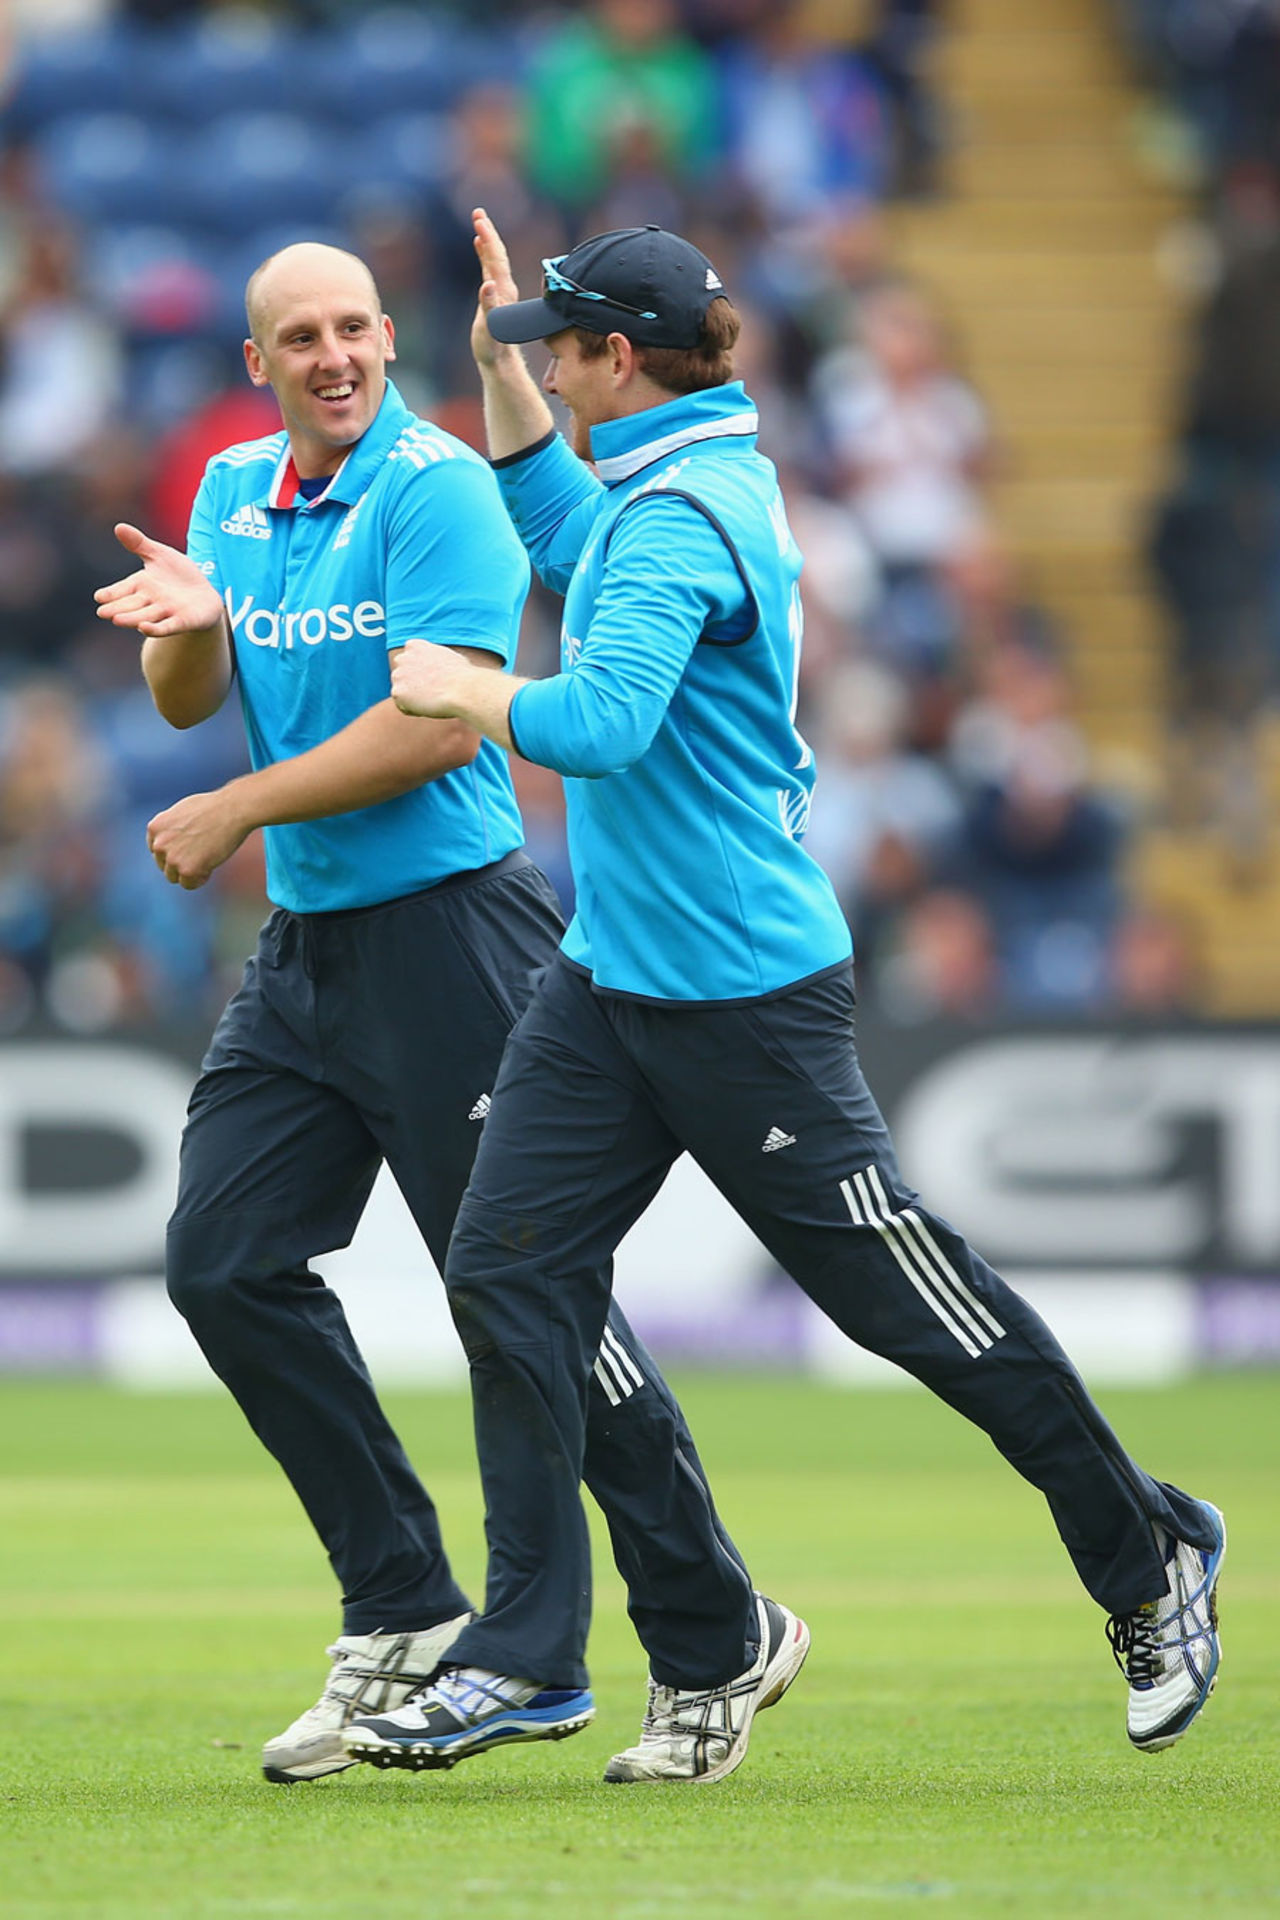 James Tredwell is congratulated after dismissing Rohit Sharma, England v India, 2nd ODI, Cardiff, August 27, 2014